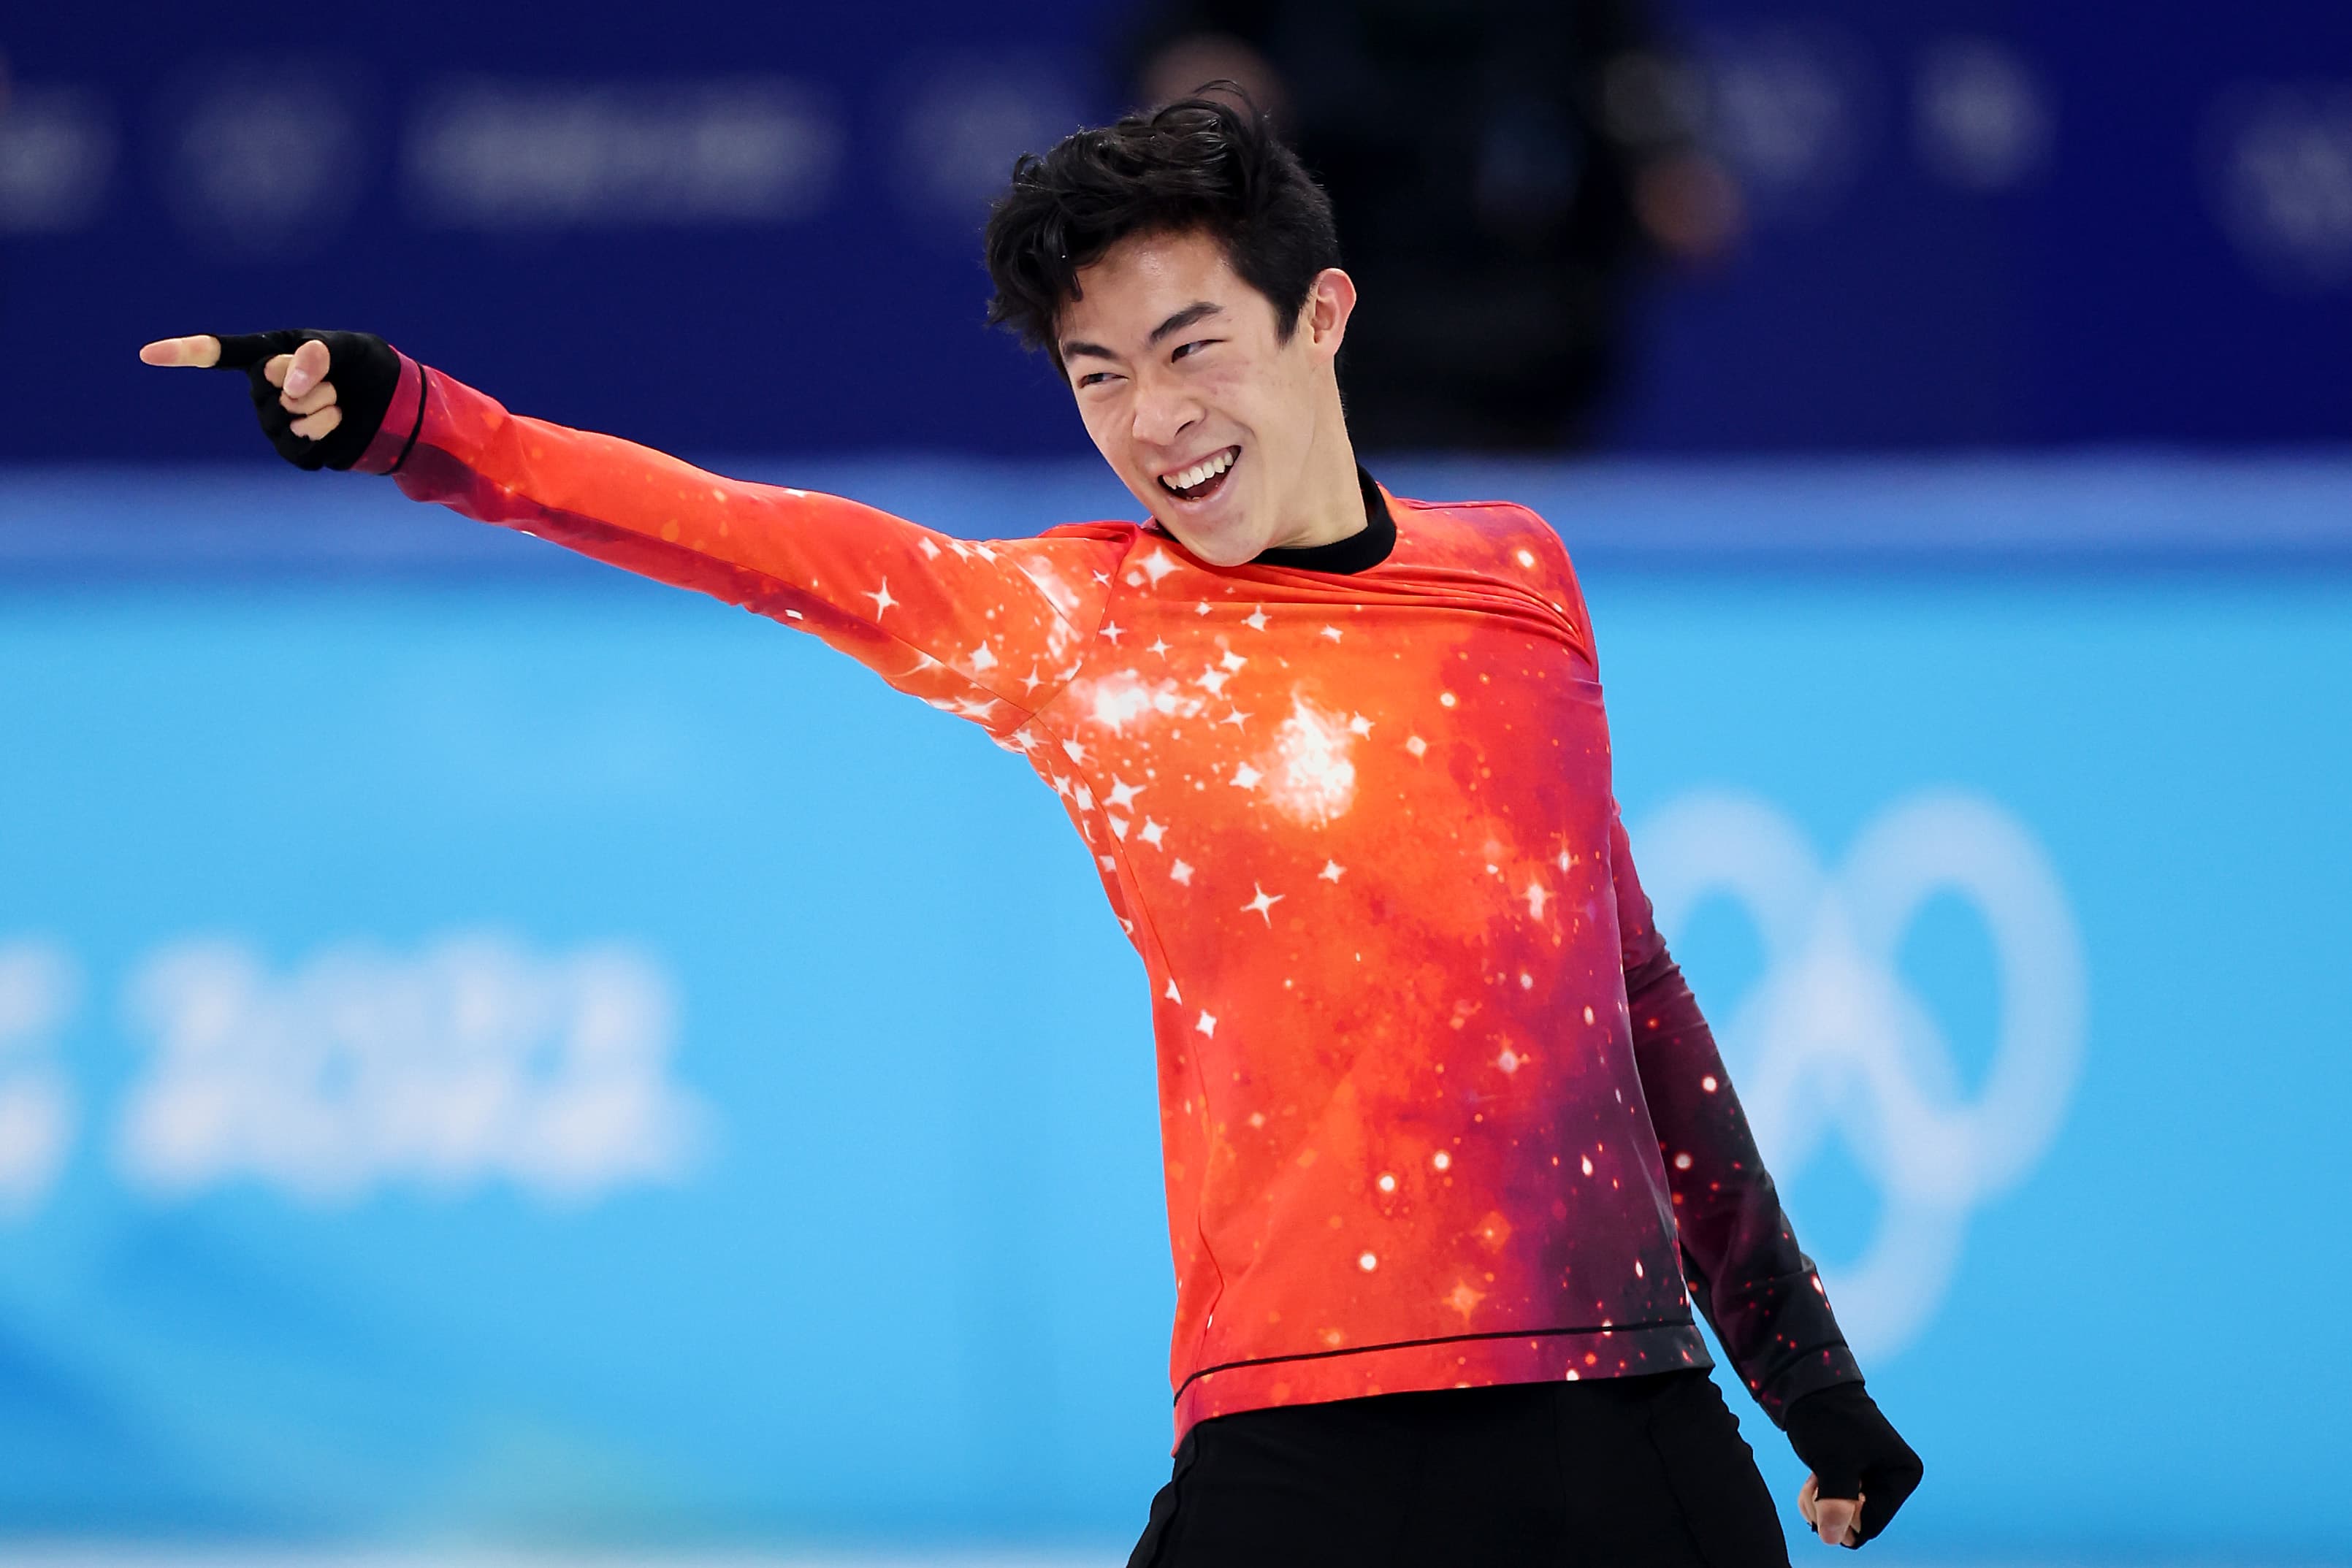 Olympic figure skater Nathan Chens 7-word mental hack to capture gold